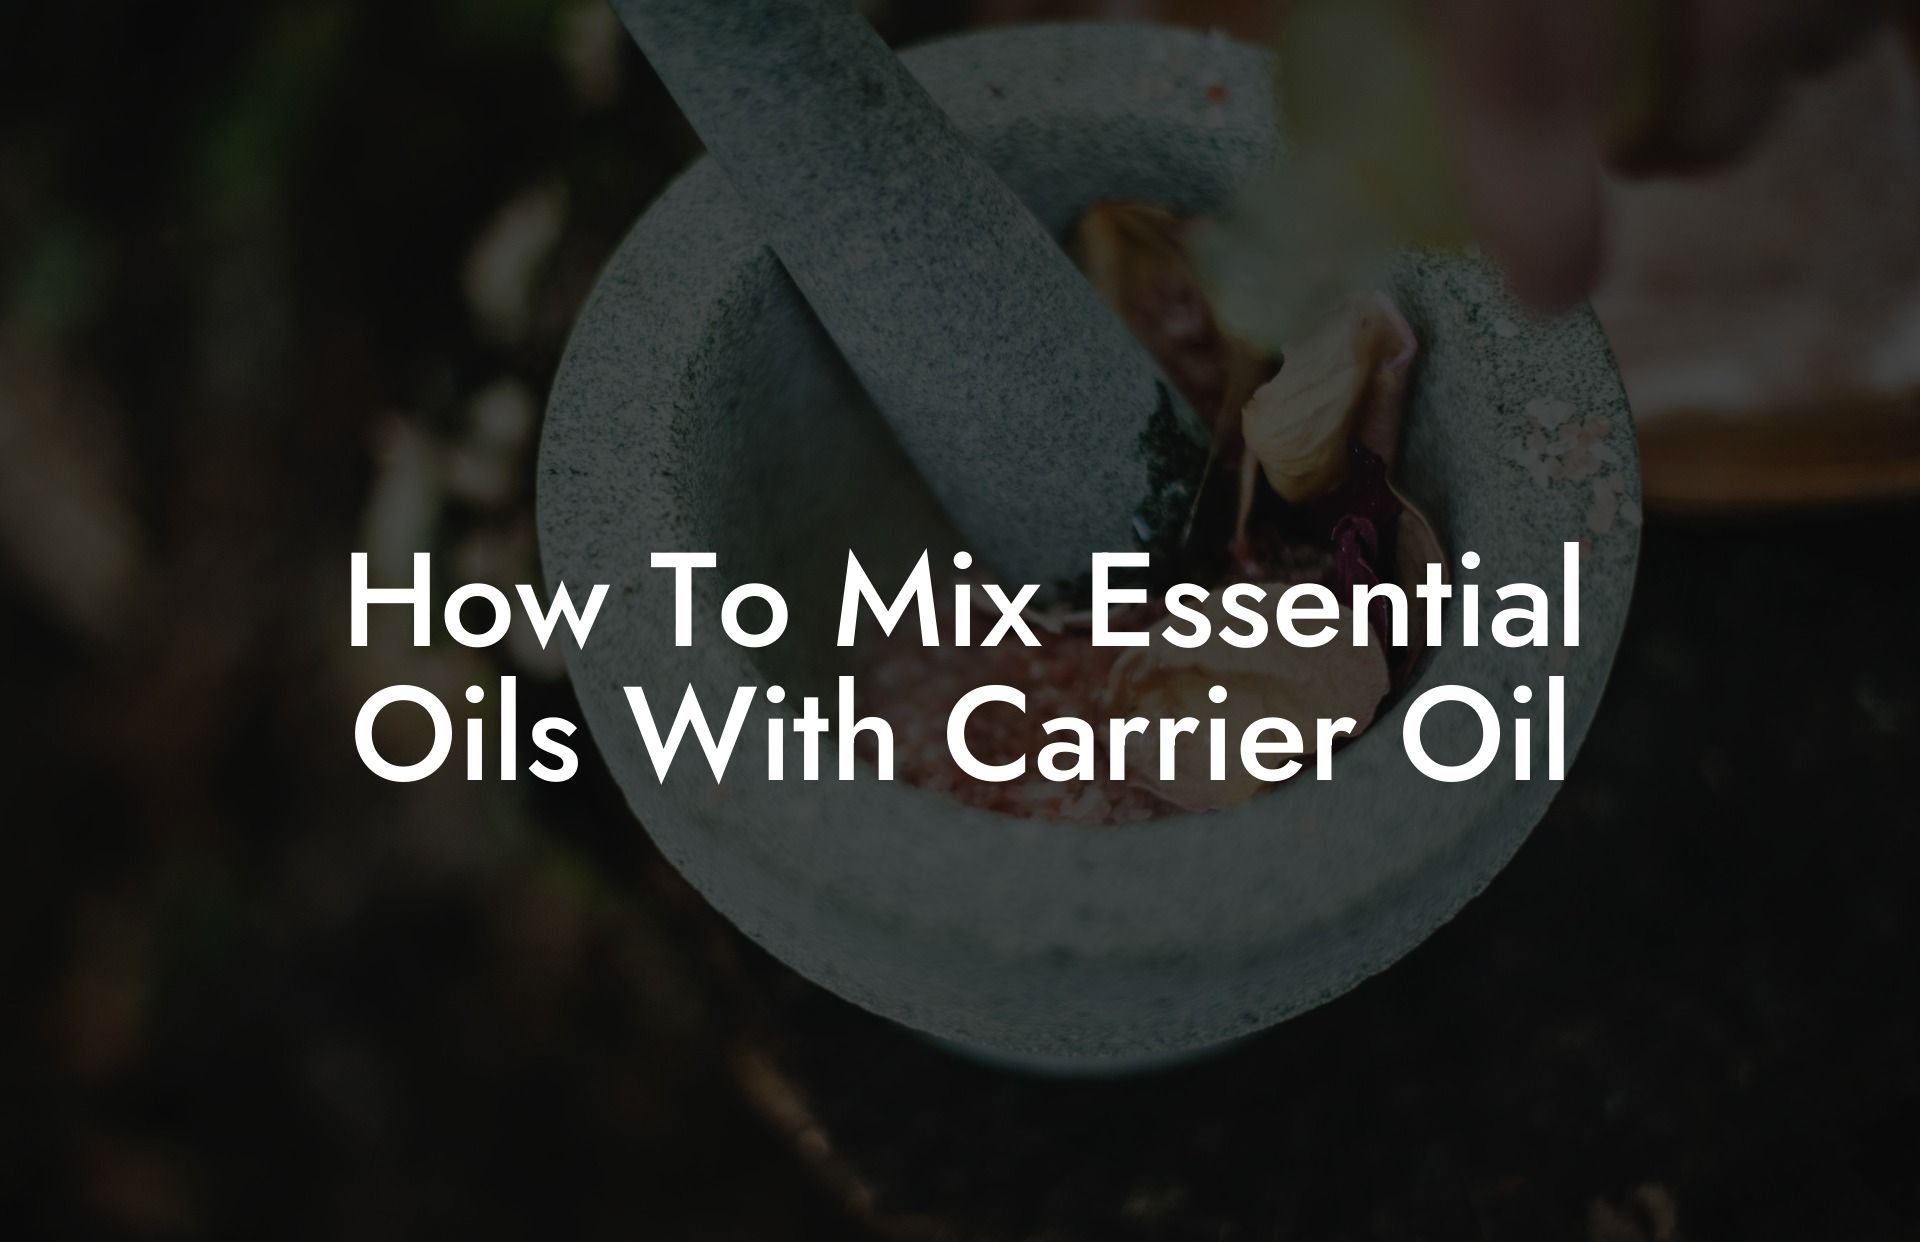 How To Mix Essential Oils With Carrier Oil